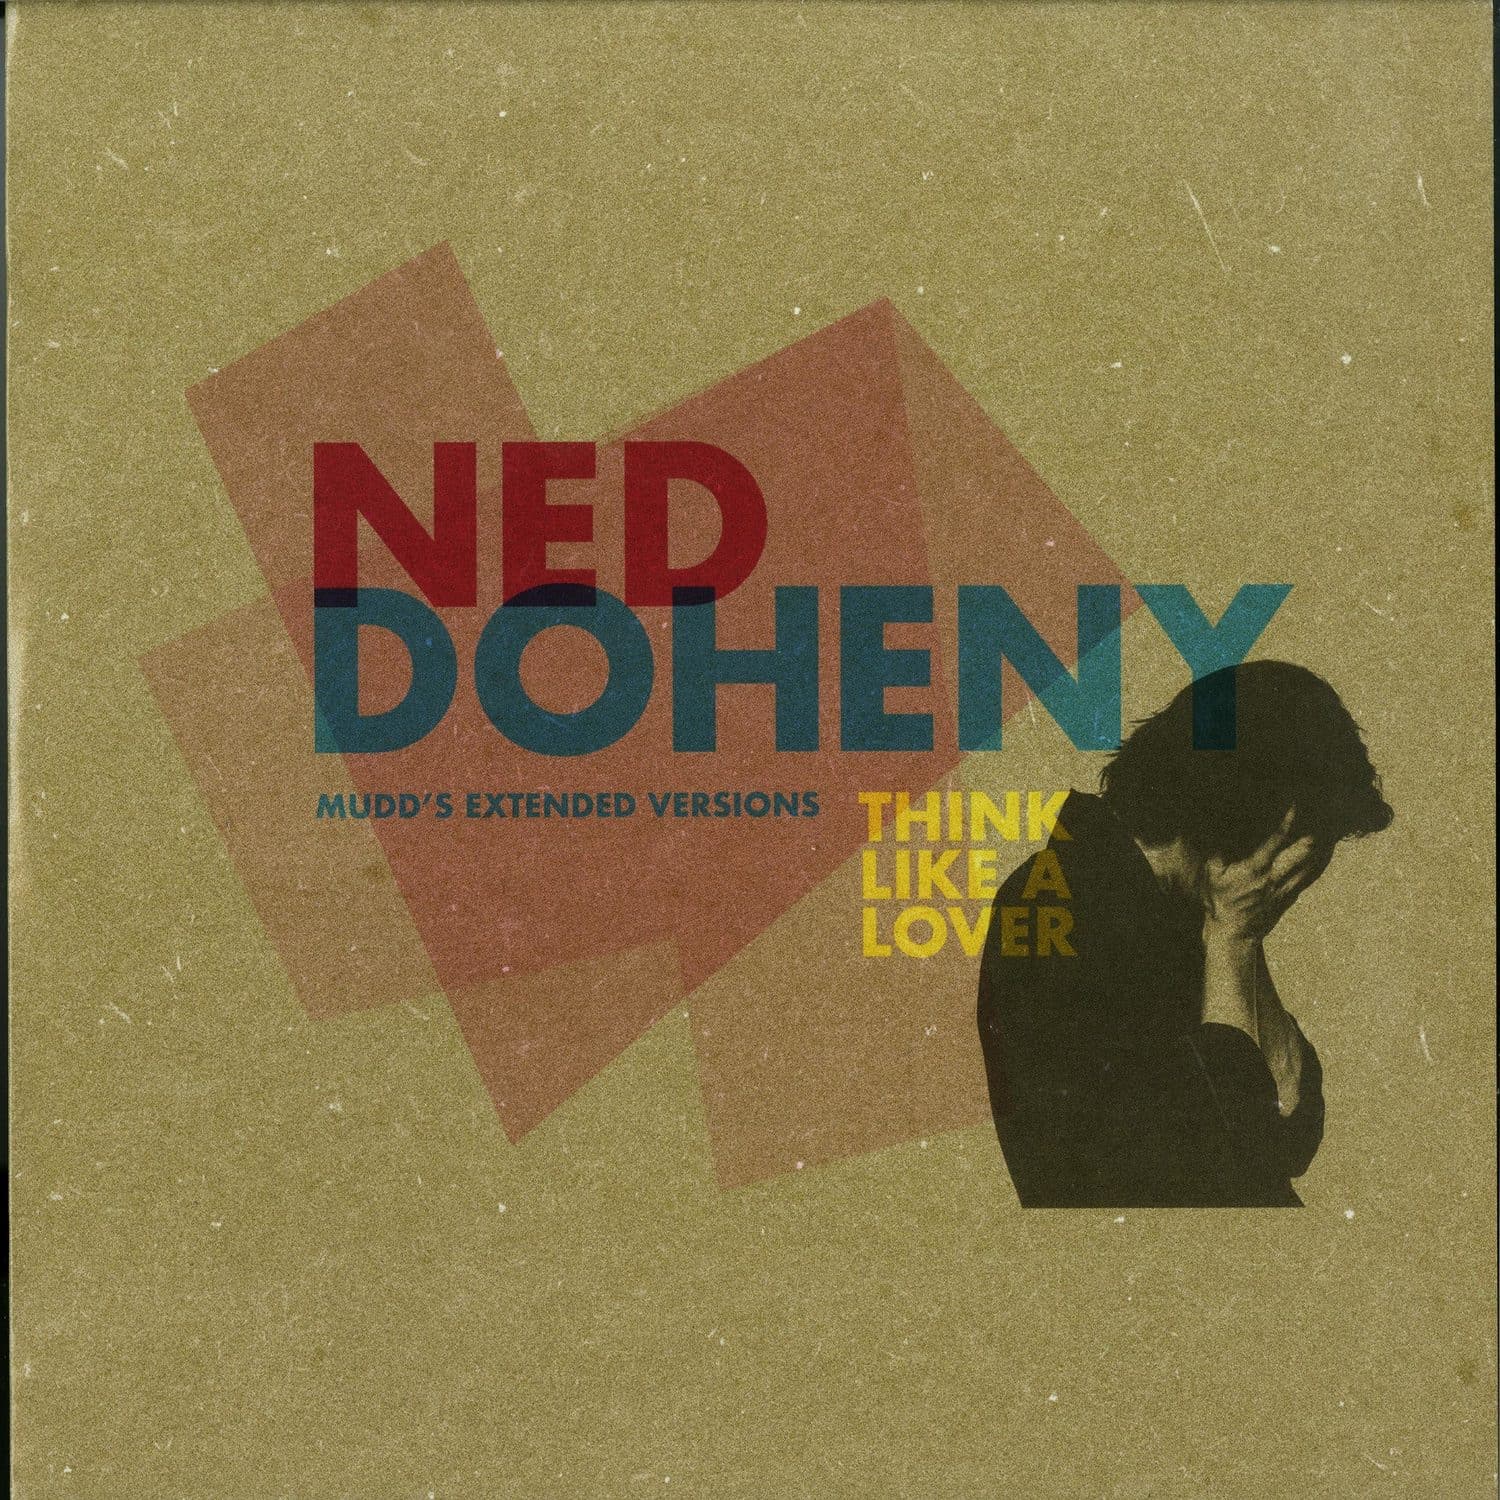 Ned Doheny - THINK LIKE A LOVER 